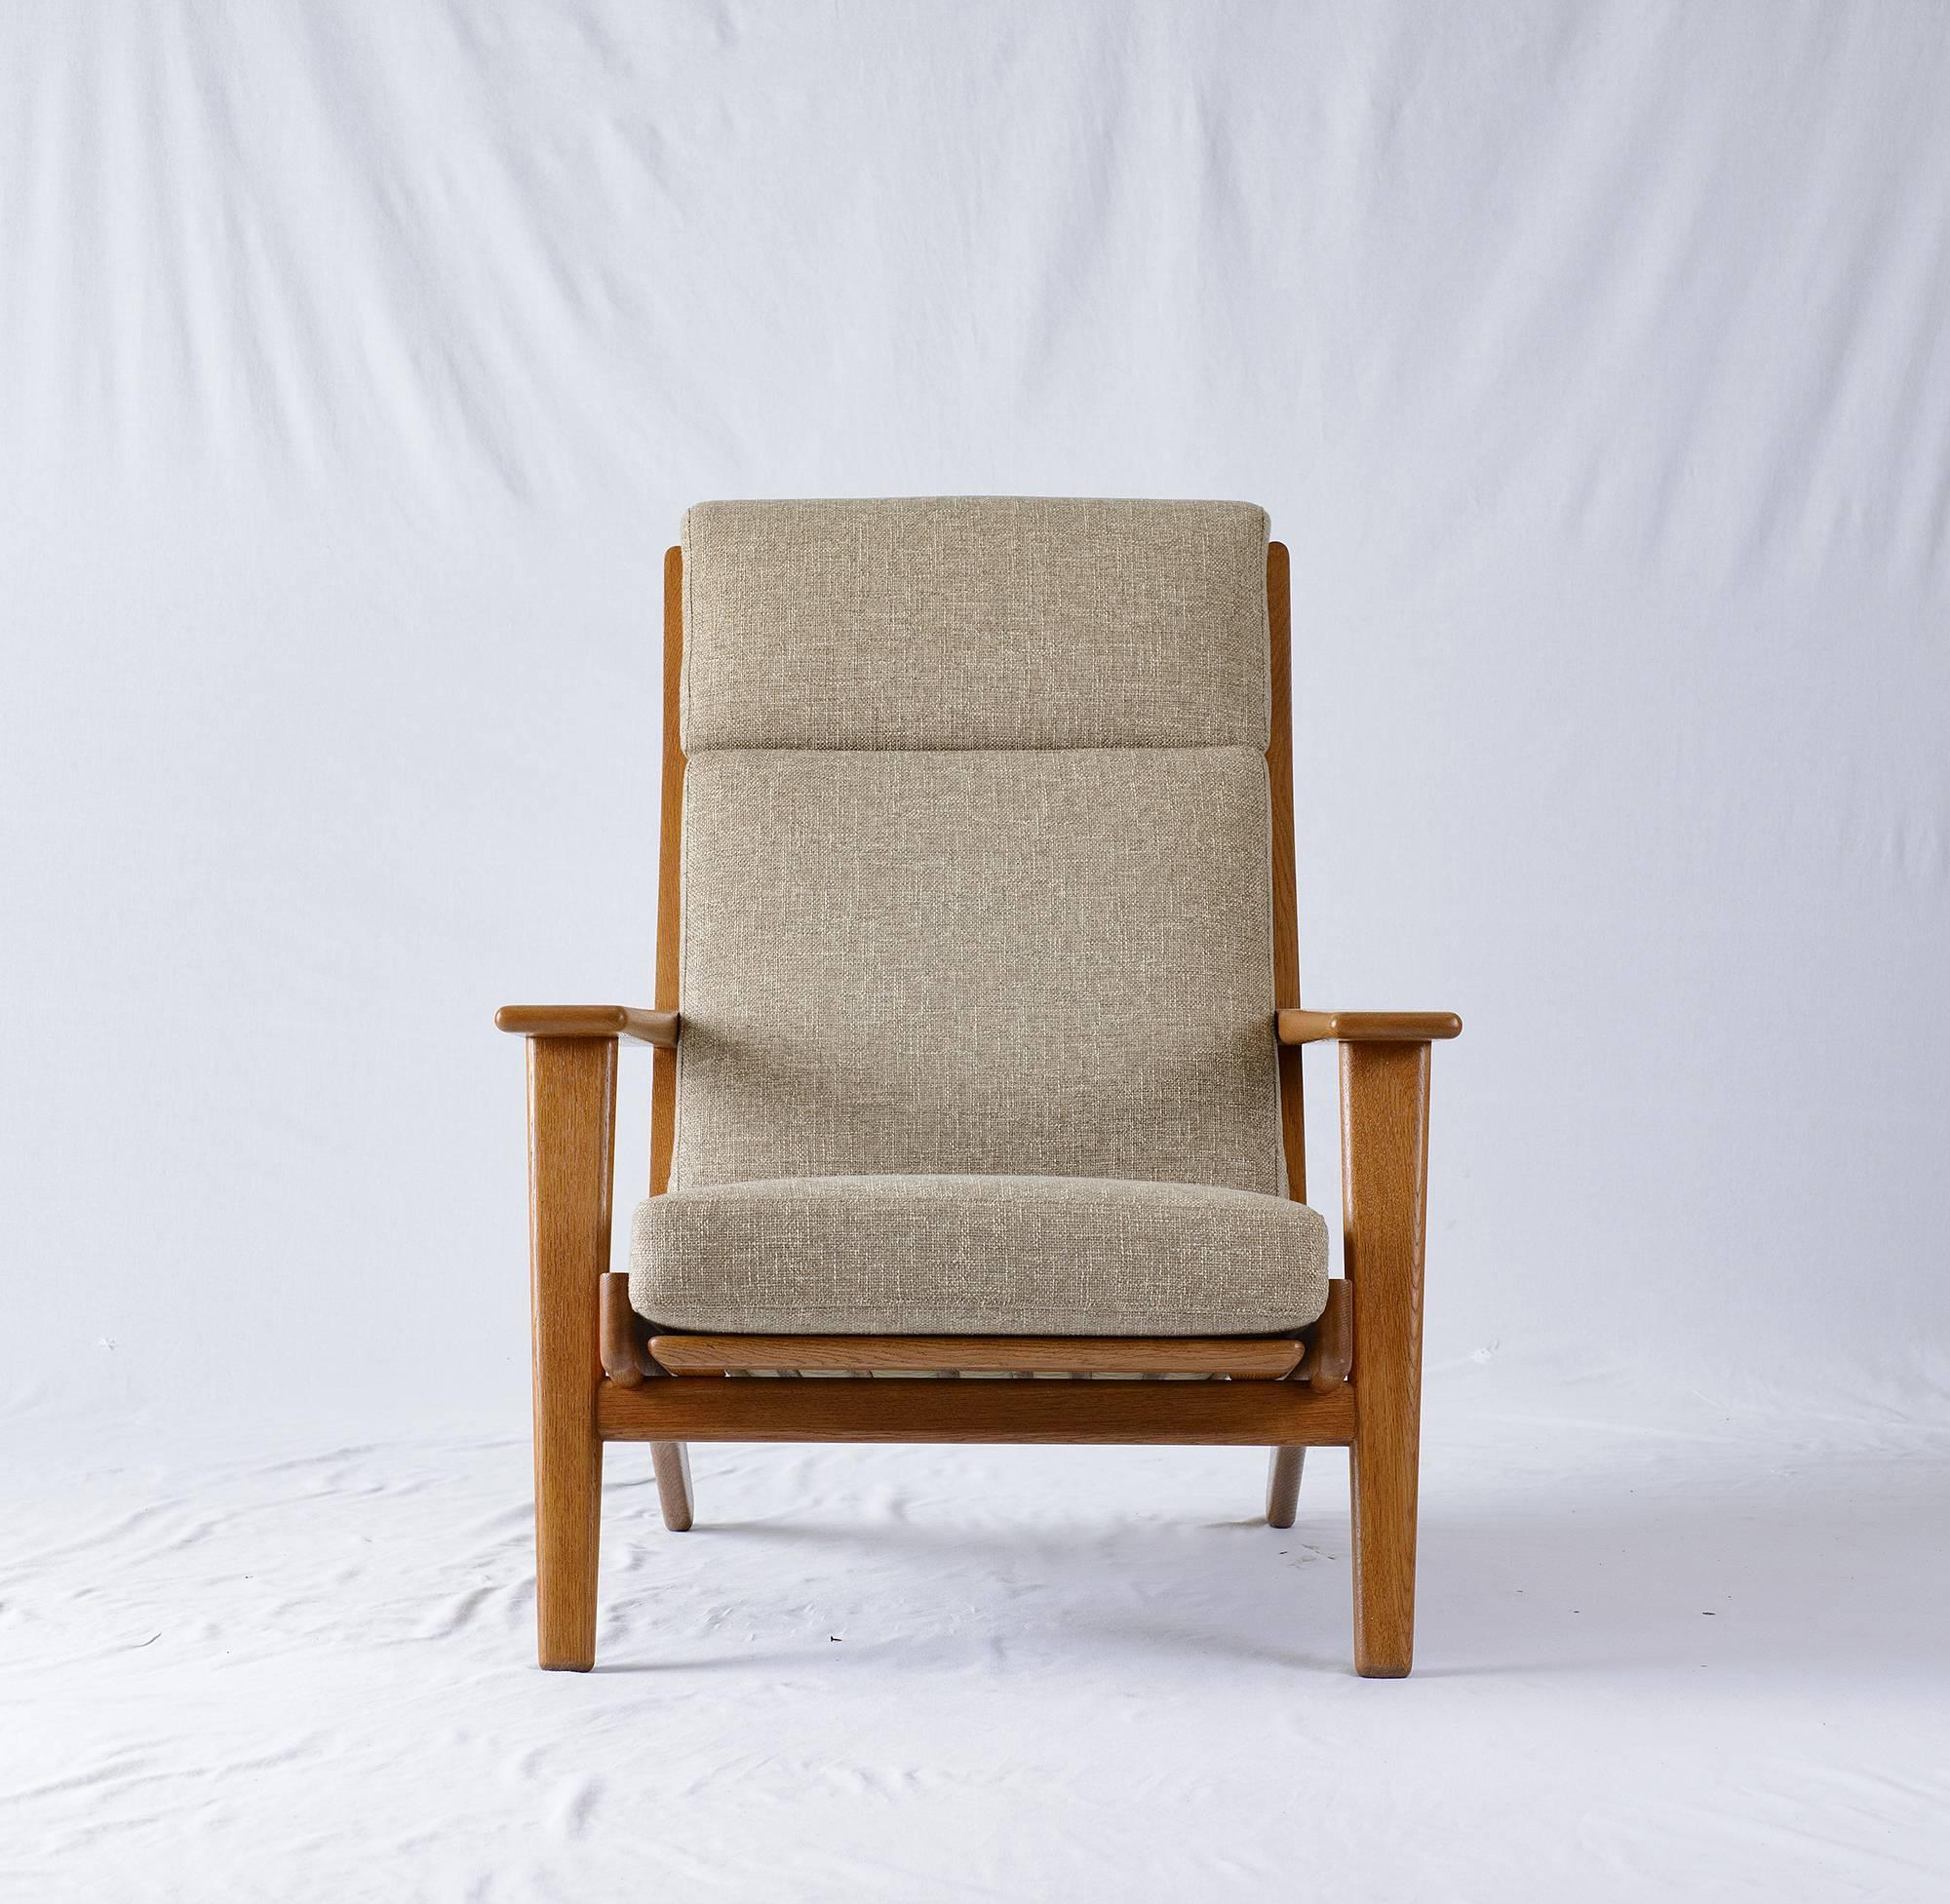 Hans Wegner GE-290 high back armchair designed in 1953 and produced by GETAMA.